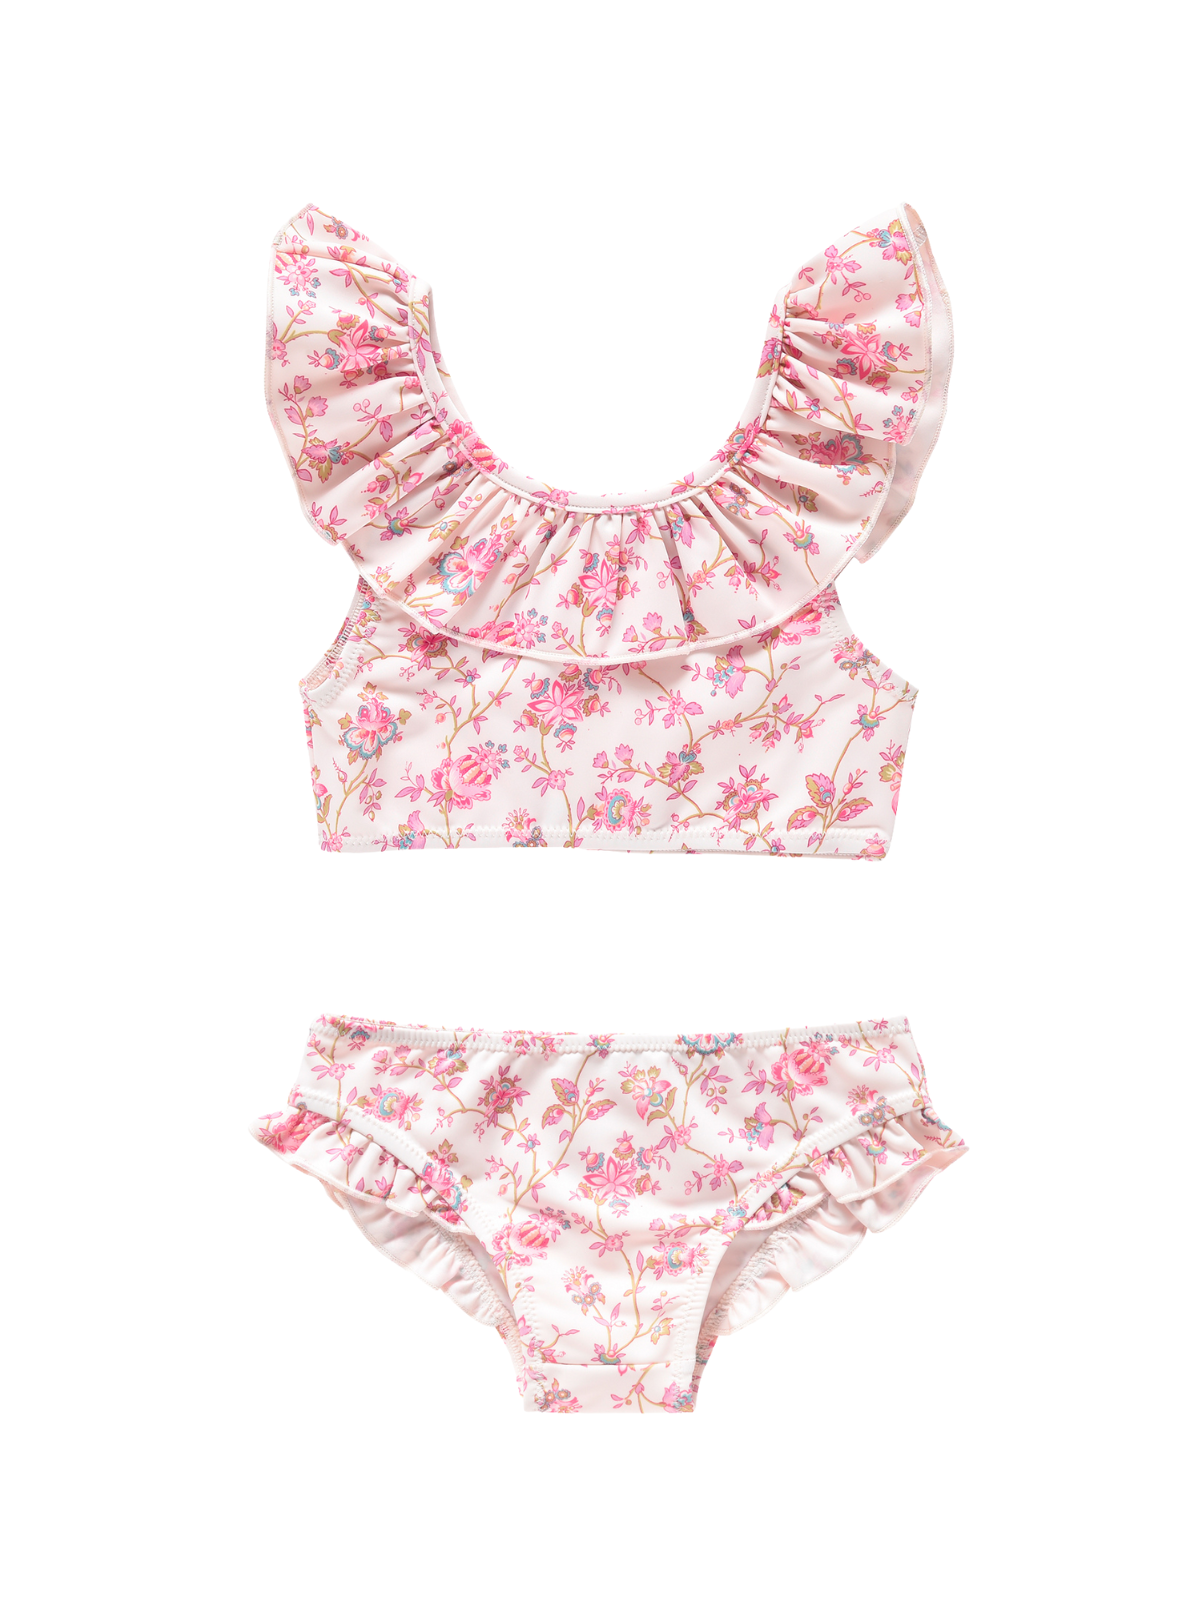 Baby's frilly knickers in ivory, white or pink in sizes from birth